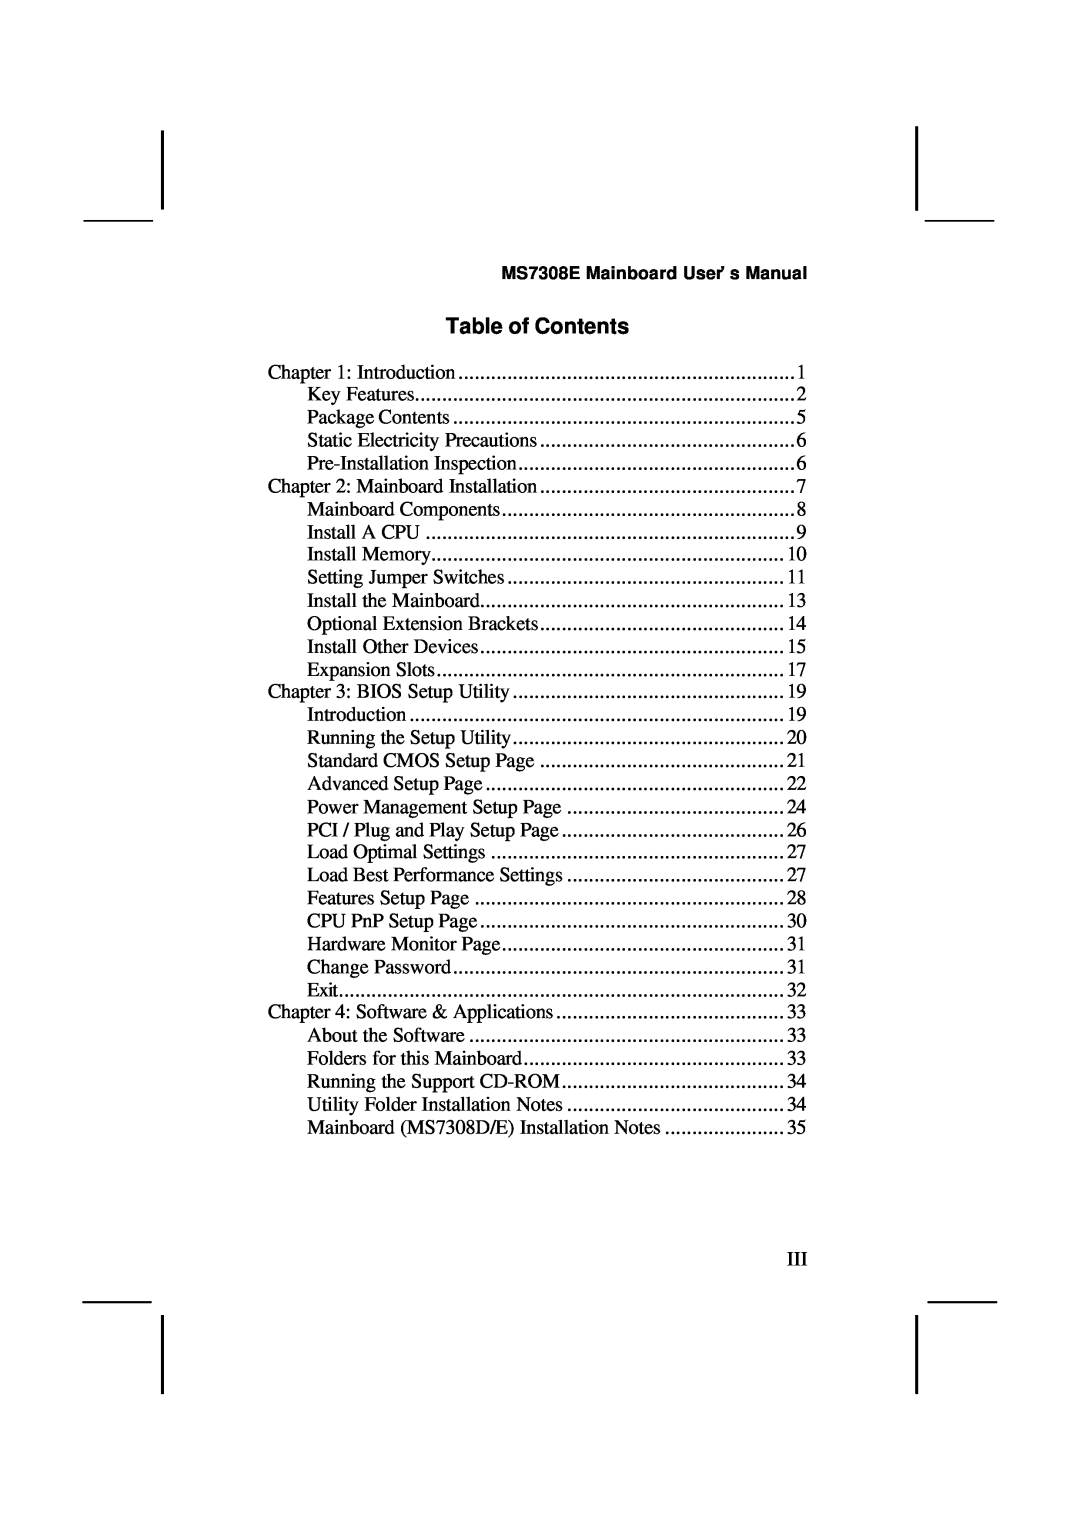 IBM MS7308D/E, V1.6 S63X/JUNE 2000 user manual Table of Contents 